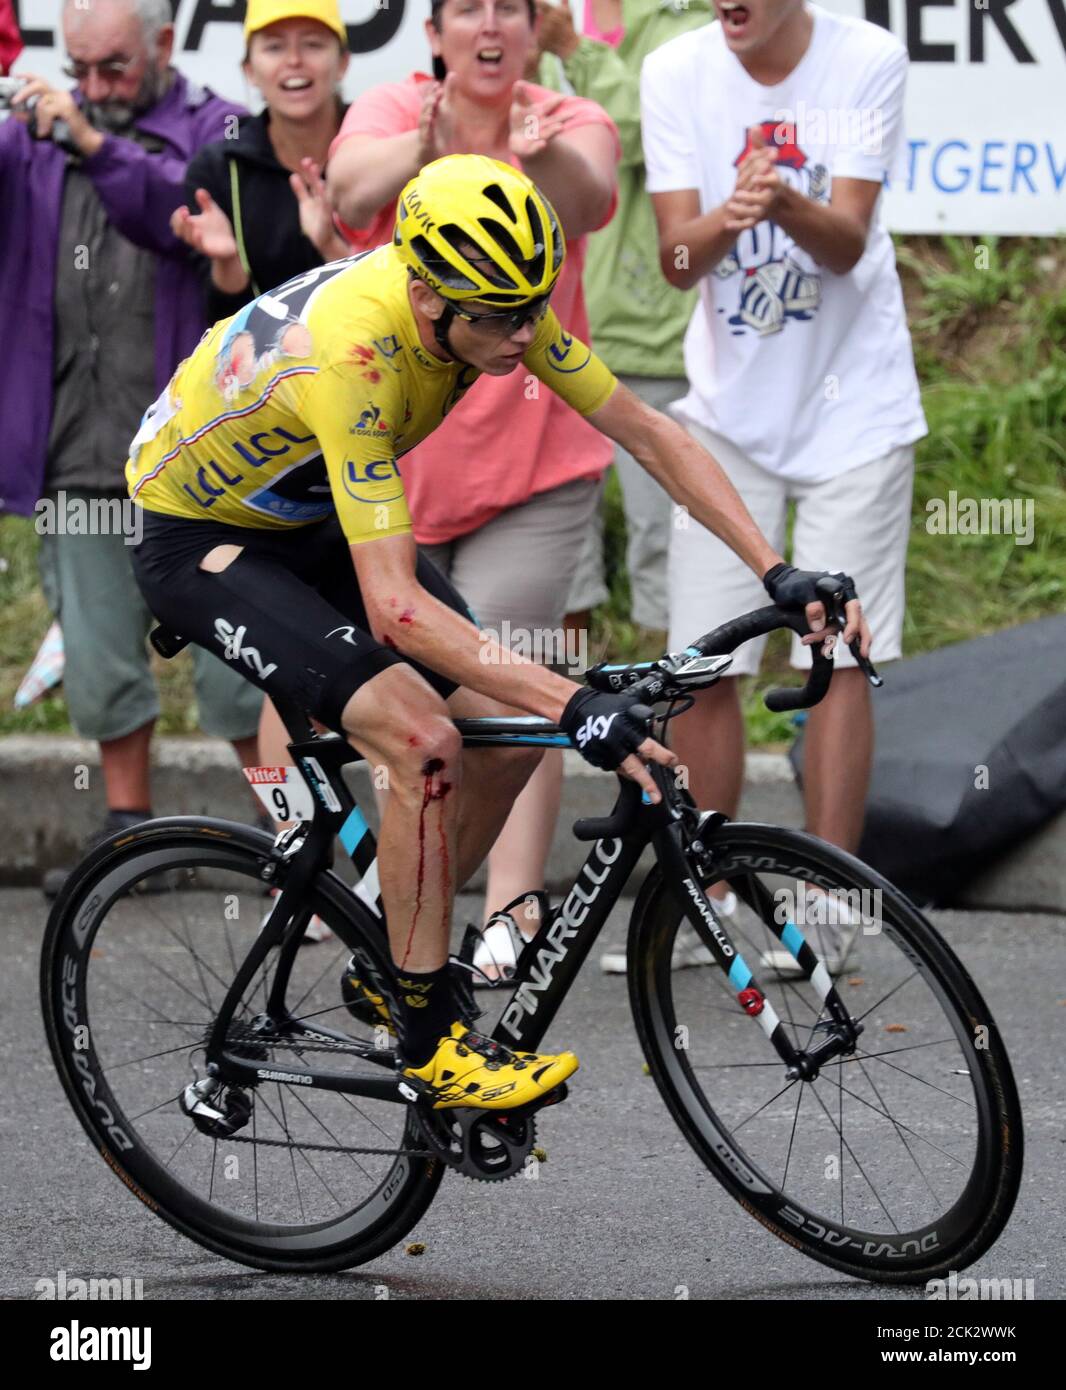 Cycling - Tour de France cycling race - The 146 km (90 miles) Stage 19 from Albertville to Saint-Gervais Mont Blanc, France - 22/07/2016  - Yellow jersey leader Team Sky rider Chris Froome of Britain rides after a fall during the stage.     REUTERS/Kenzo Tribouillard/Pool Stock Photo